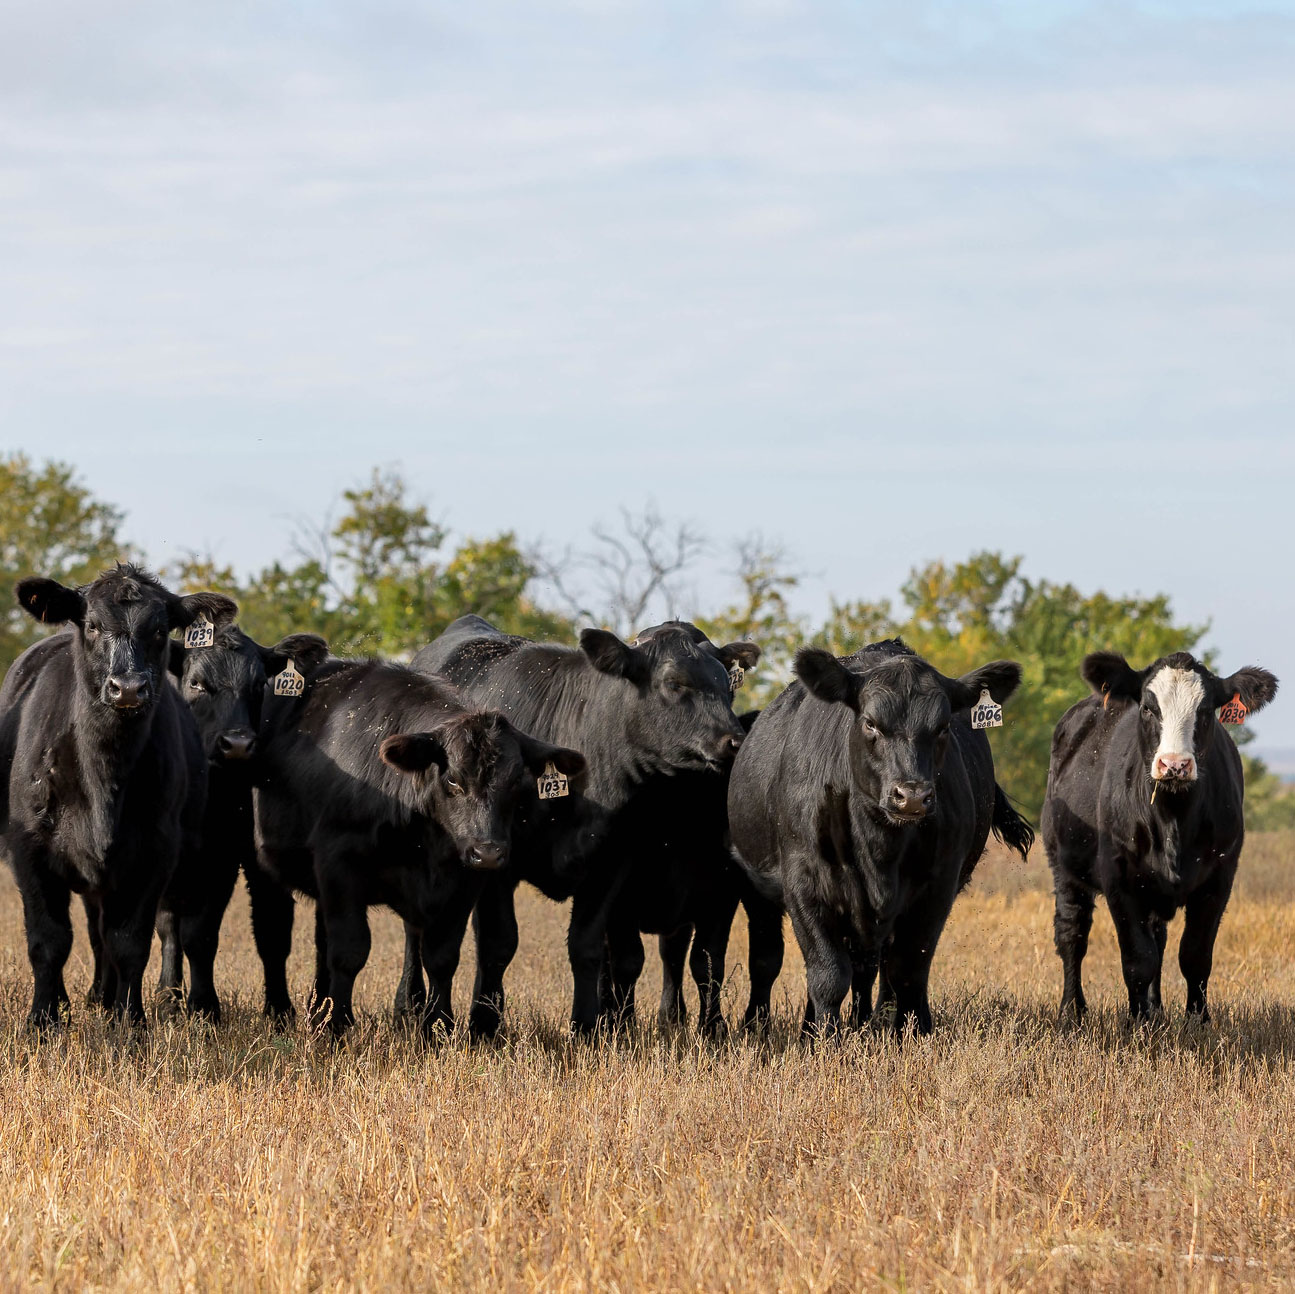 When purchasing bred heifers, it is important to know their expected calving date and vaccination history. (Photo courtesy of Kansas State University Research and Extension.)